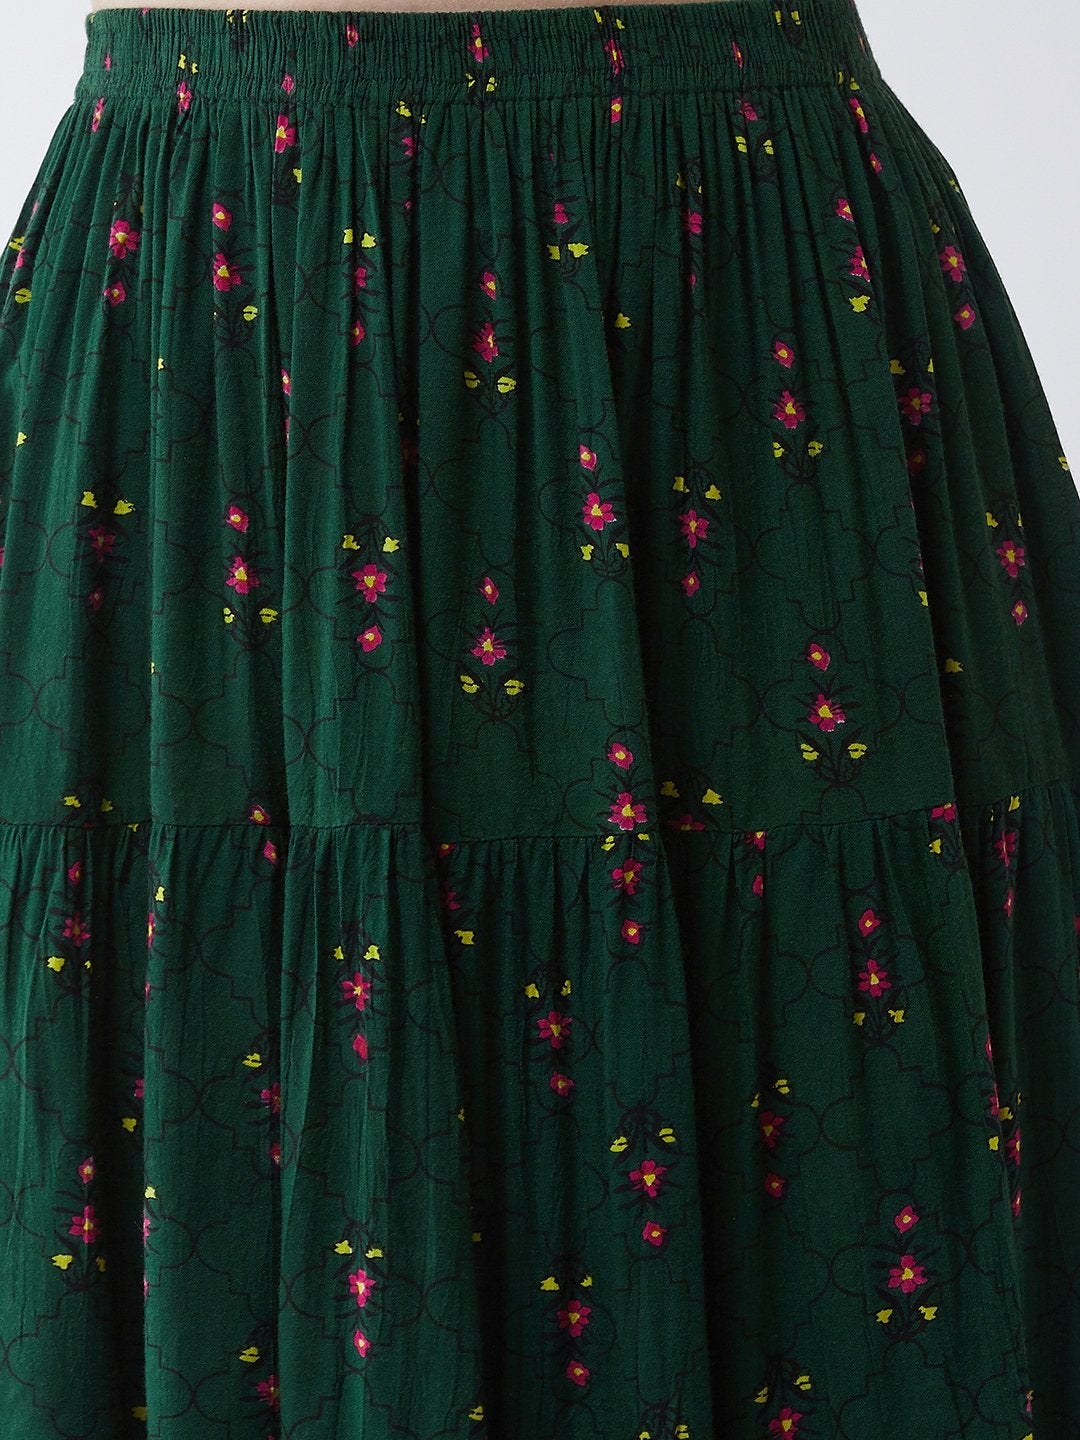 Women's Green Mughal Printed Top  With Skirt And Embroidered Shrug - Pannkh